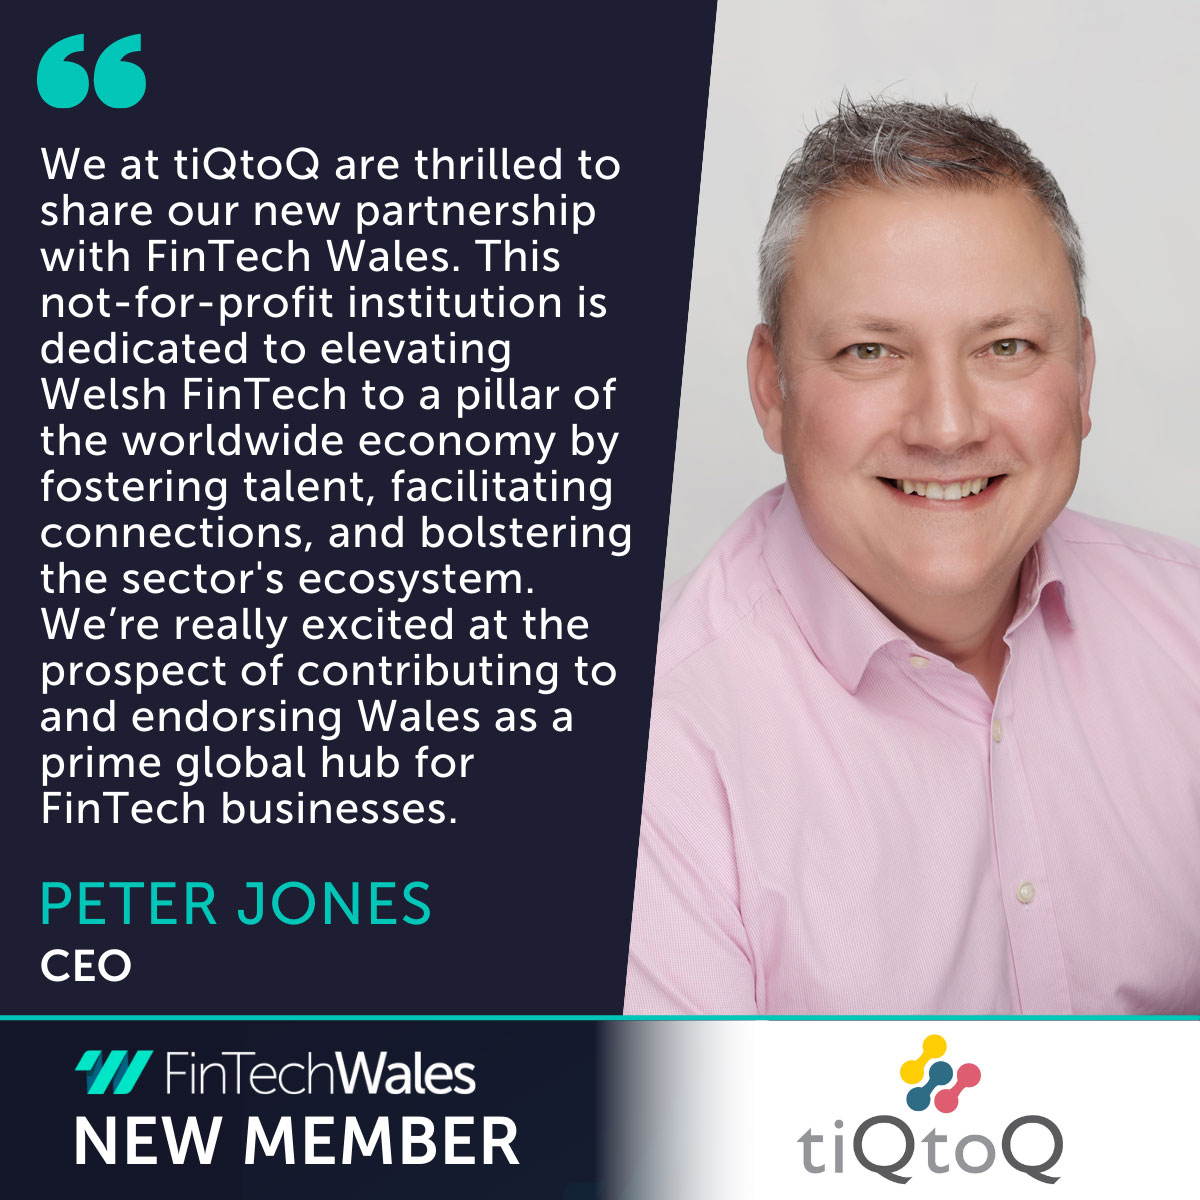 tiQtoQ partners with FinTech Wales